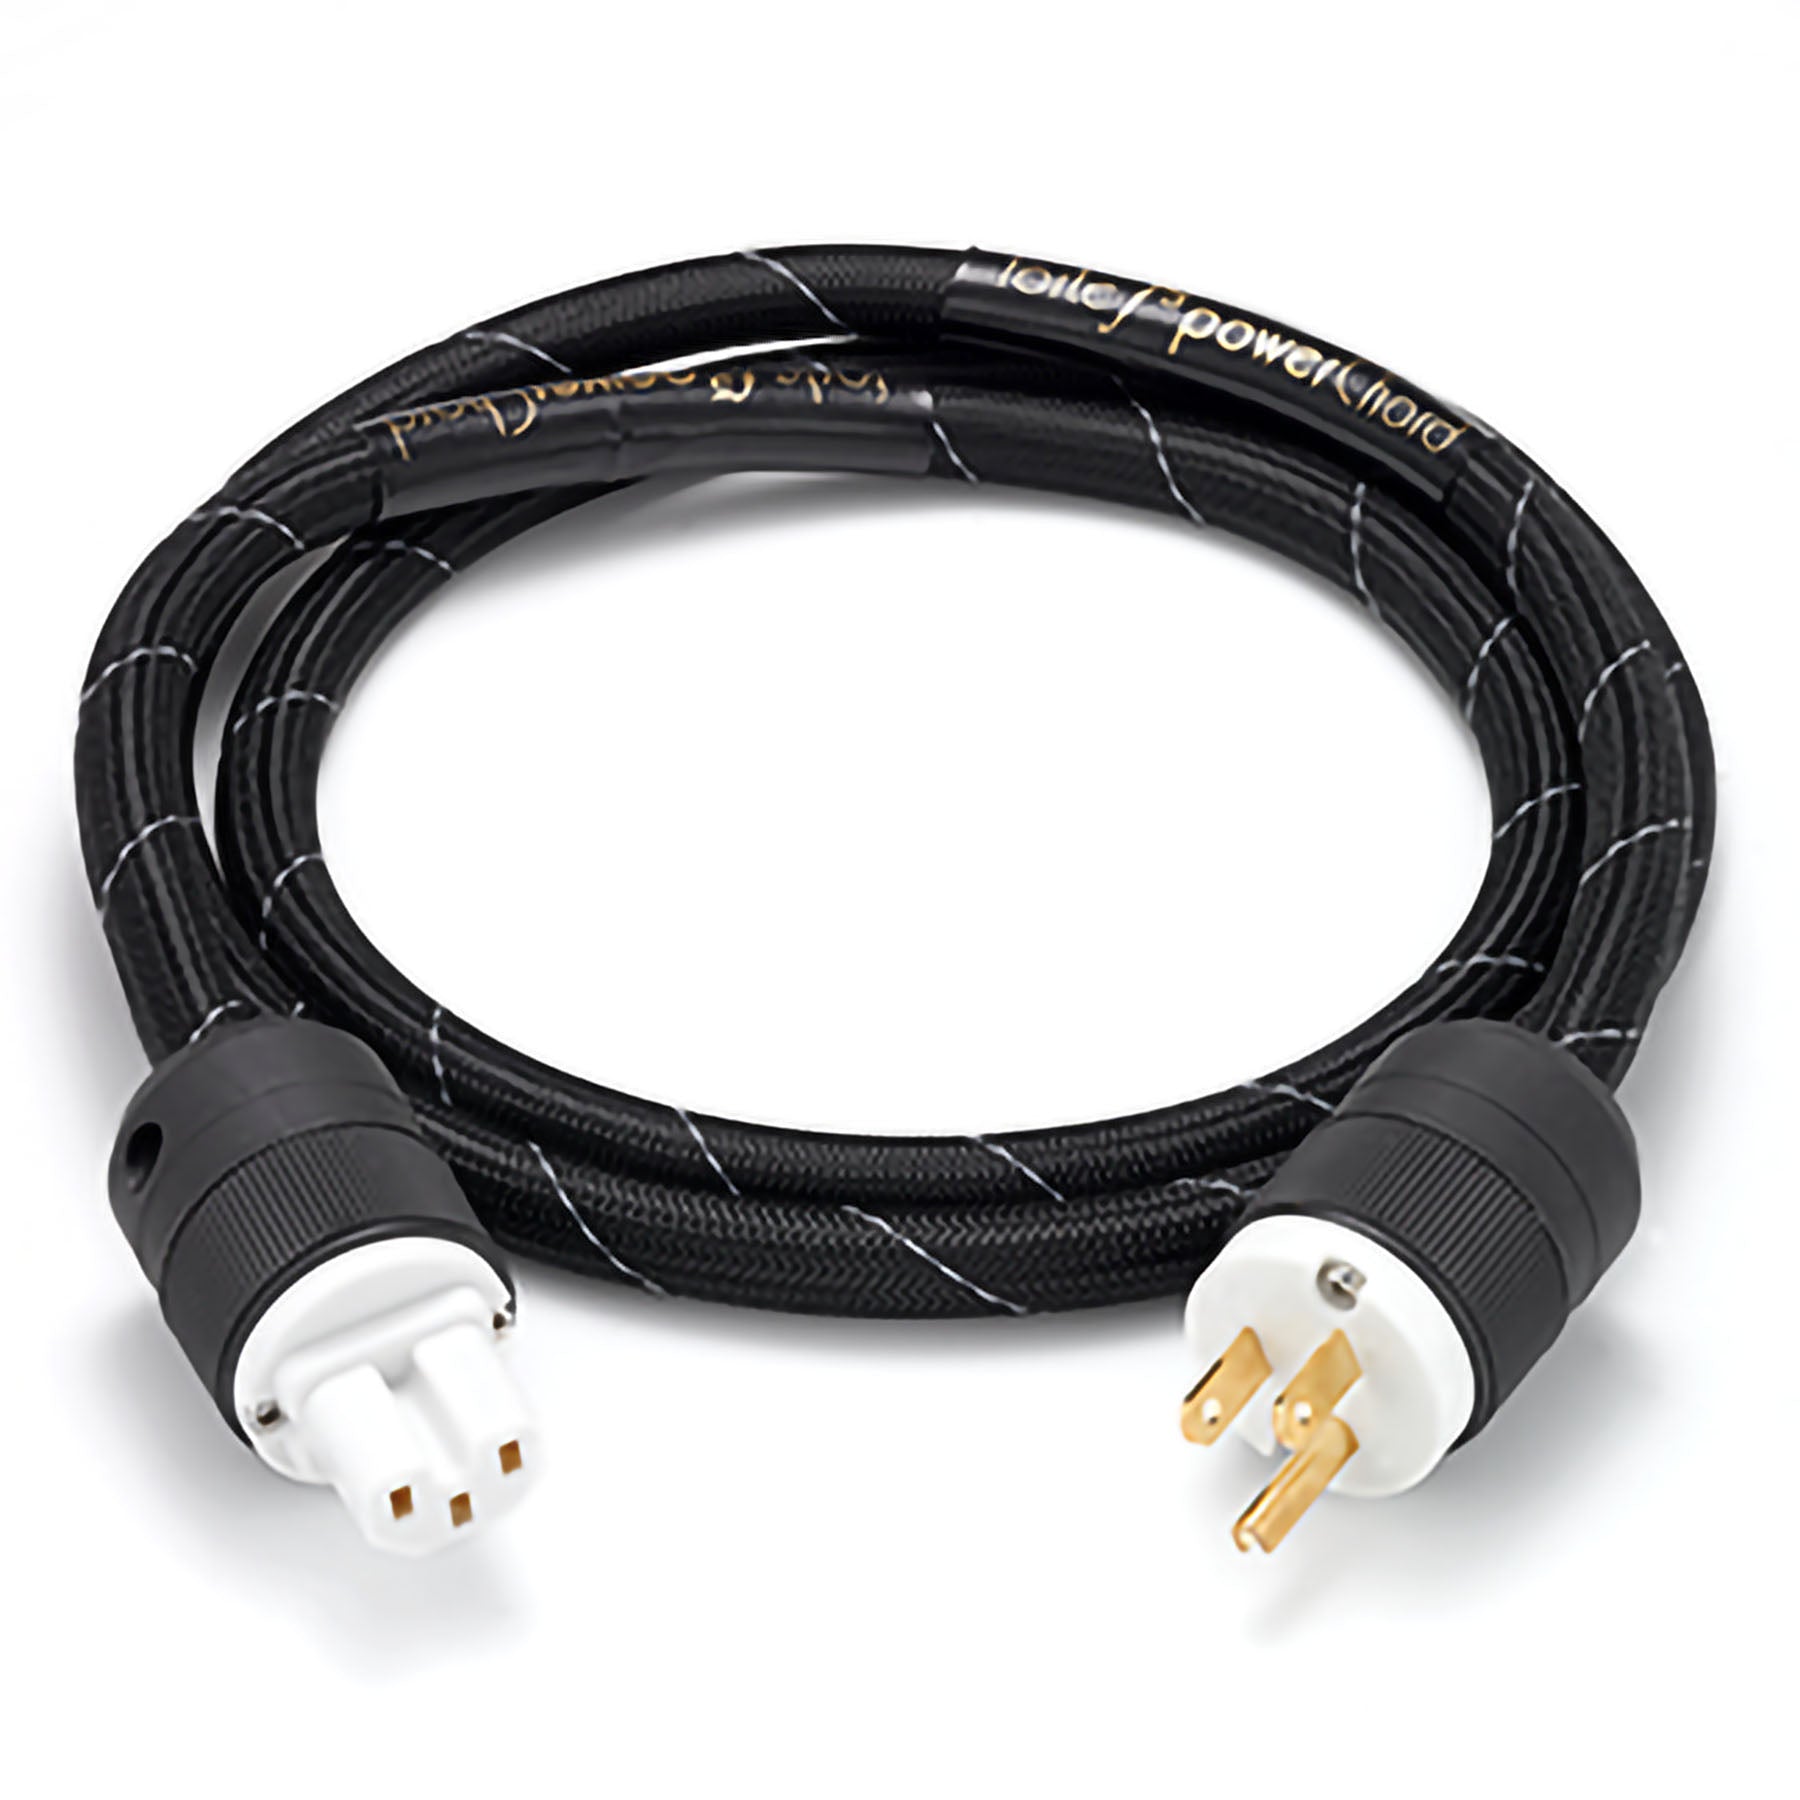 Audience Forte f5 AUS-IEC Power Cable